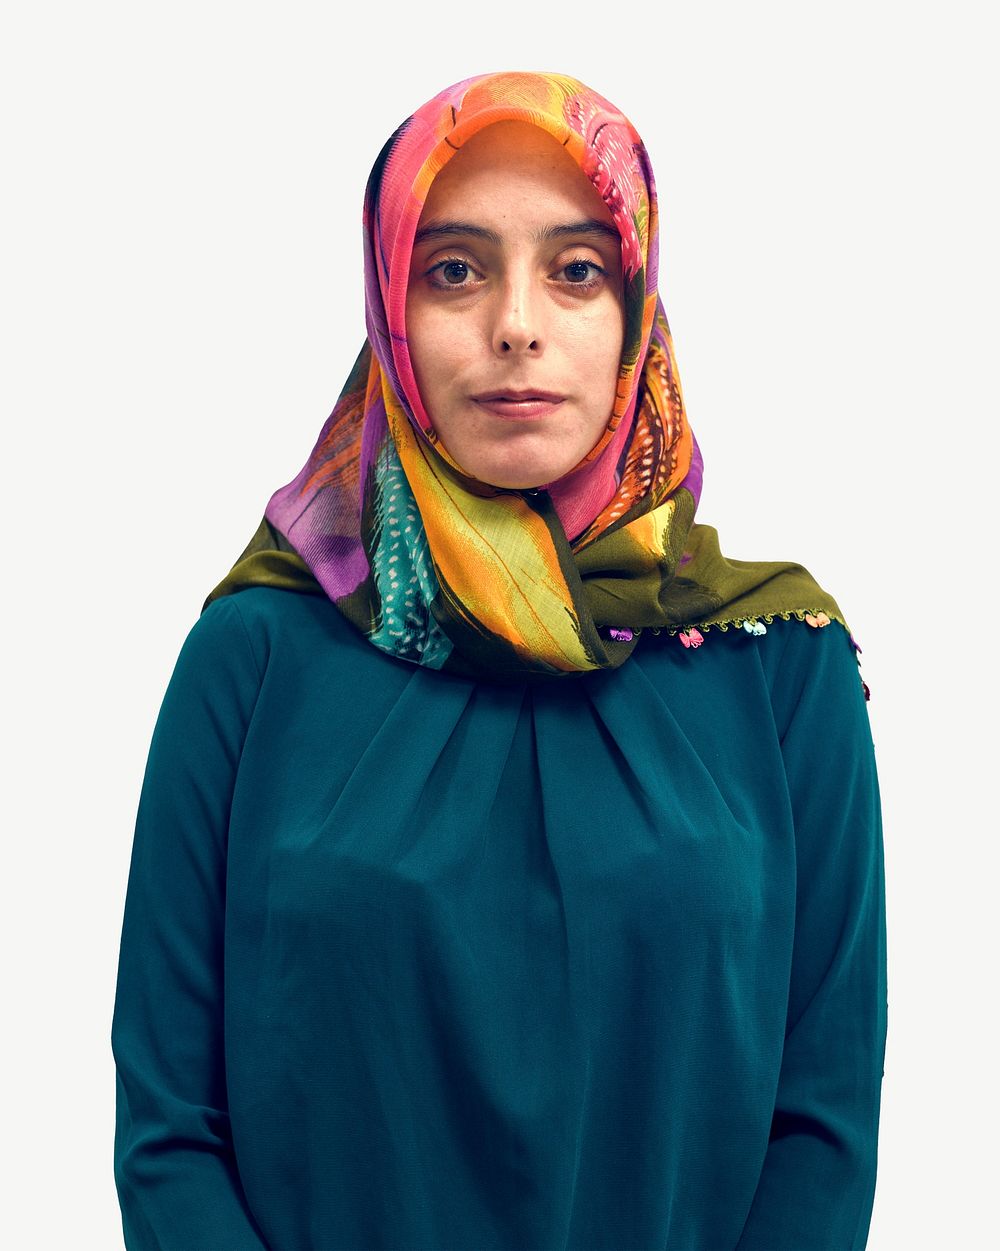 Muslim woman collage element psd